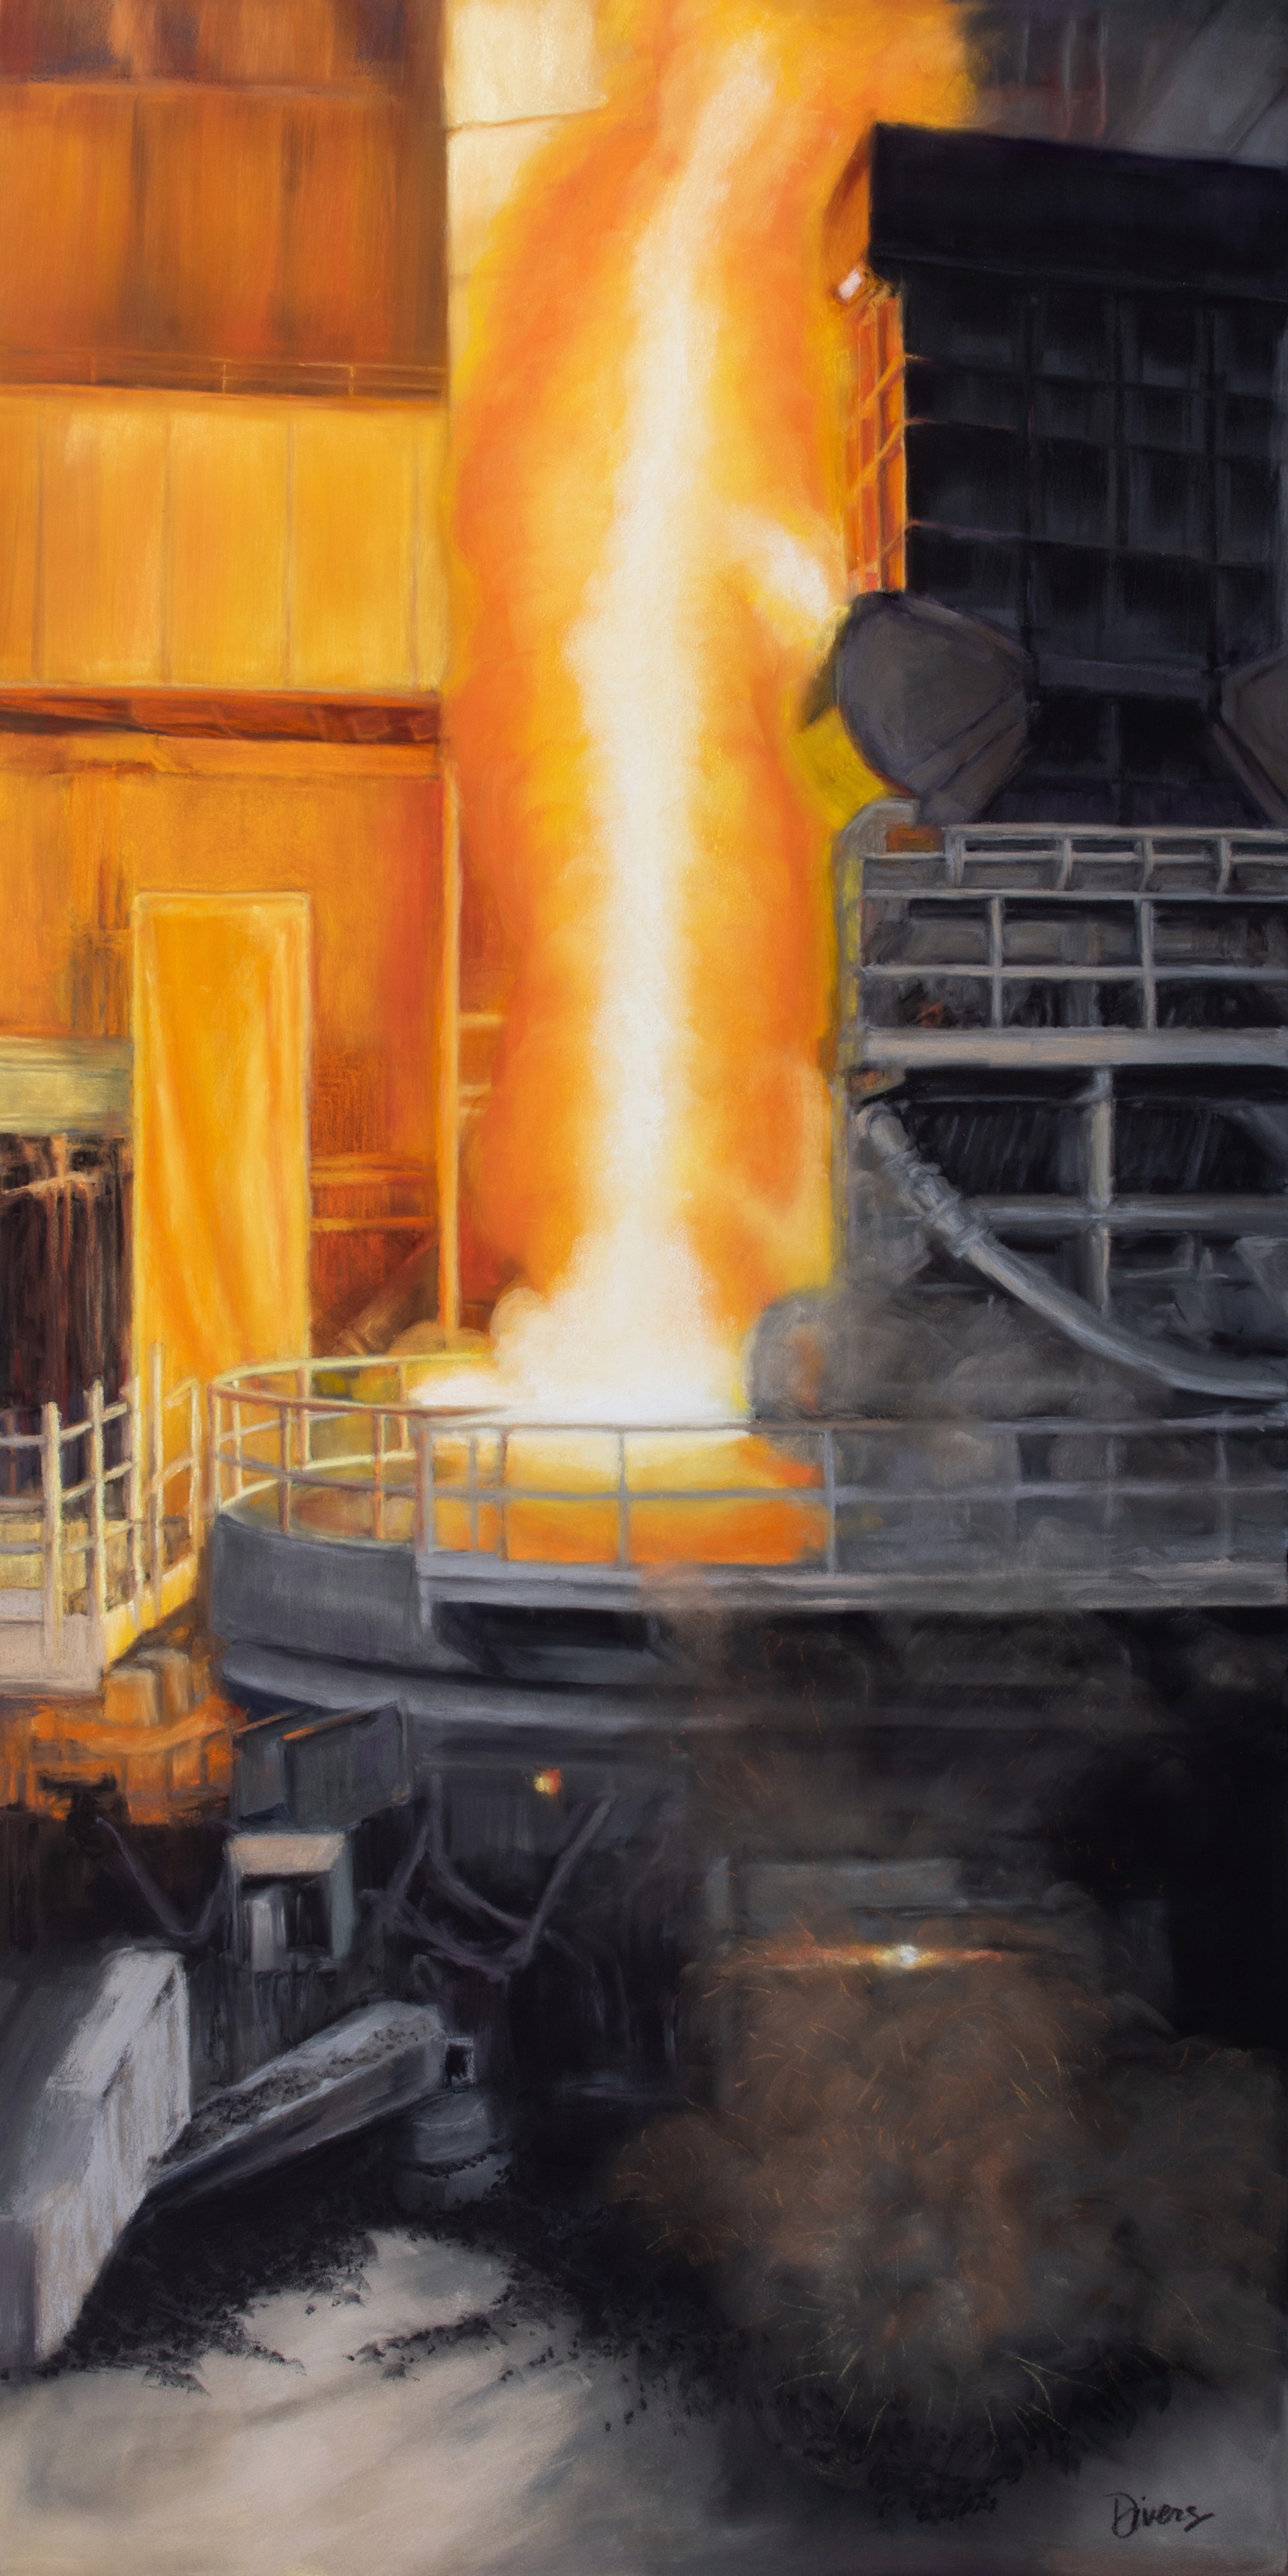 Electric Arc Furnace by Kristin Divers